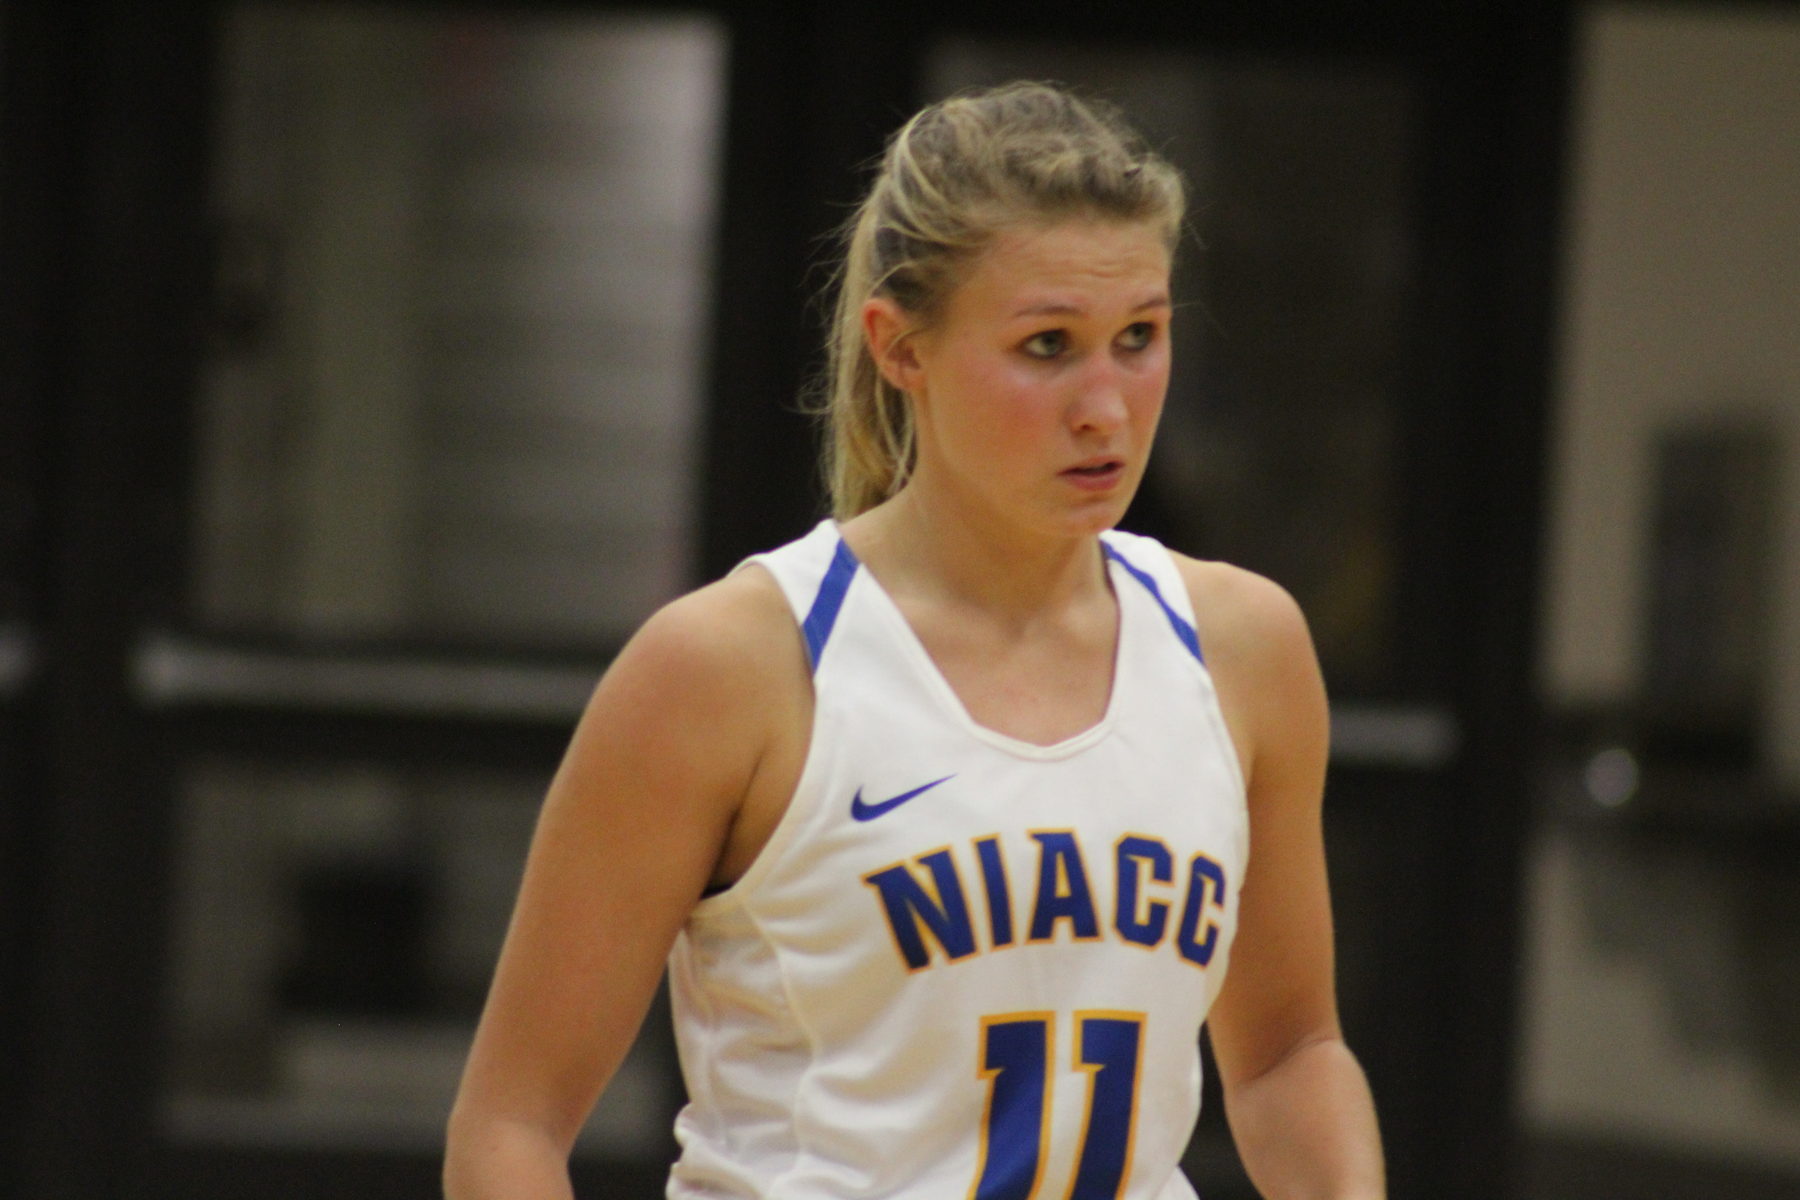 NIACC's Larson earns ICCAC player of week honors